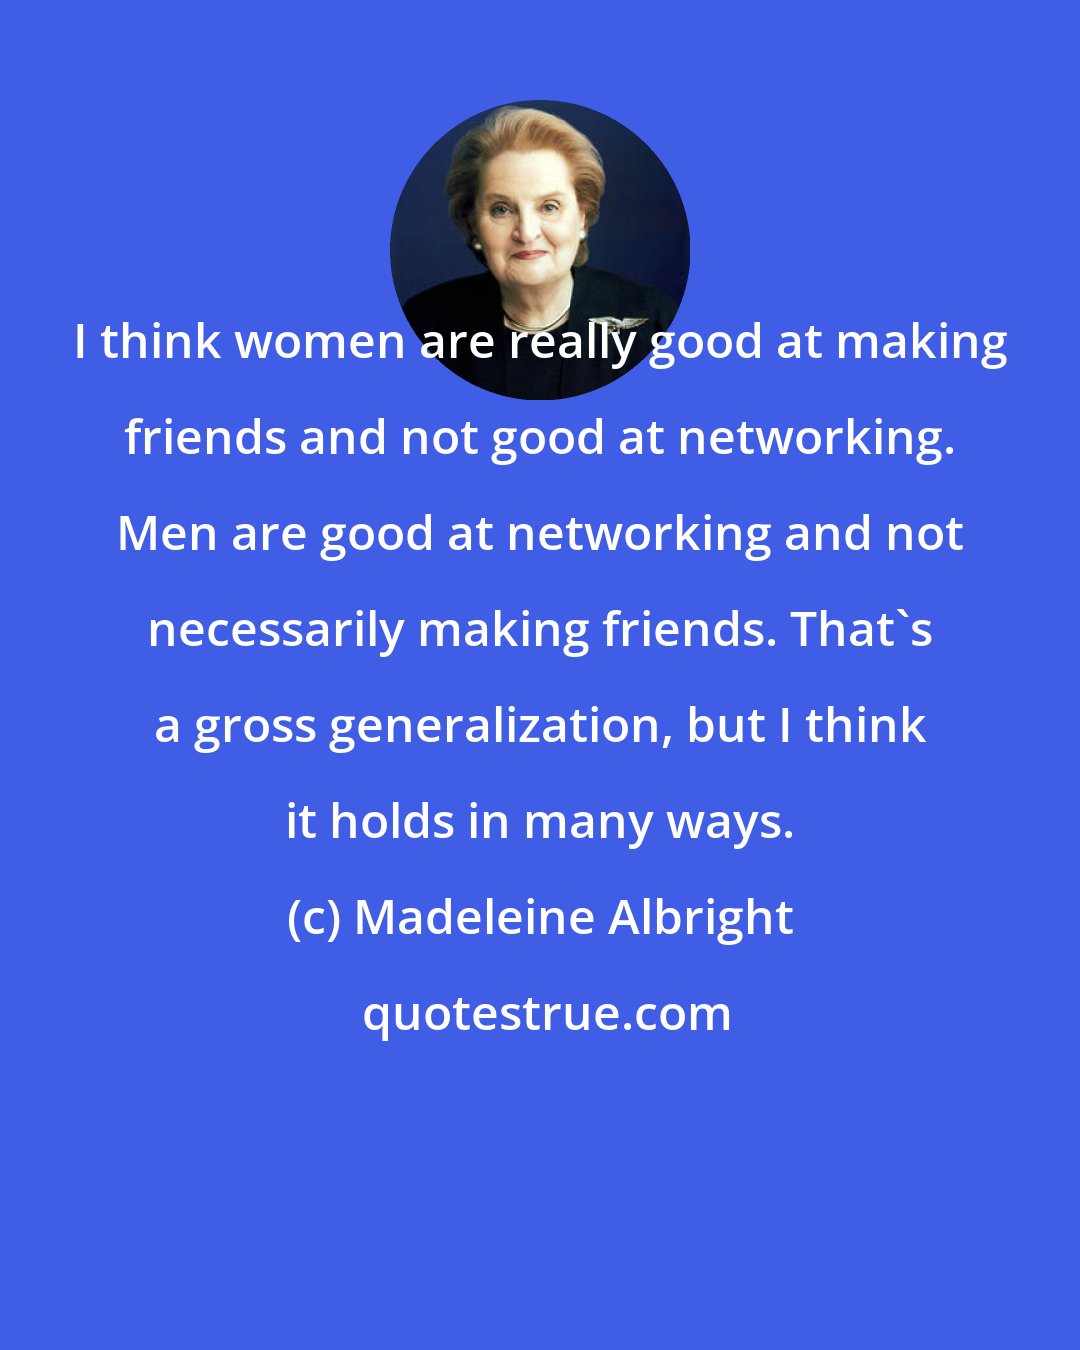 Madeleine Albright: I think women are really good at making friends and not good at networking. Men are good at networking and not necessarily making friends. That's a gross generalization, but I think it holds in many ways.